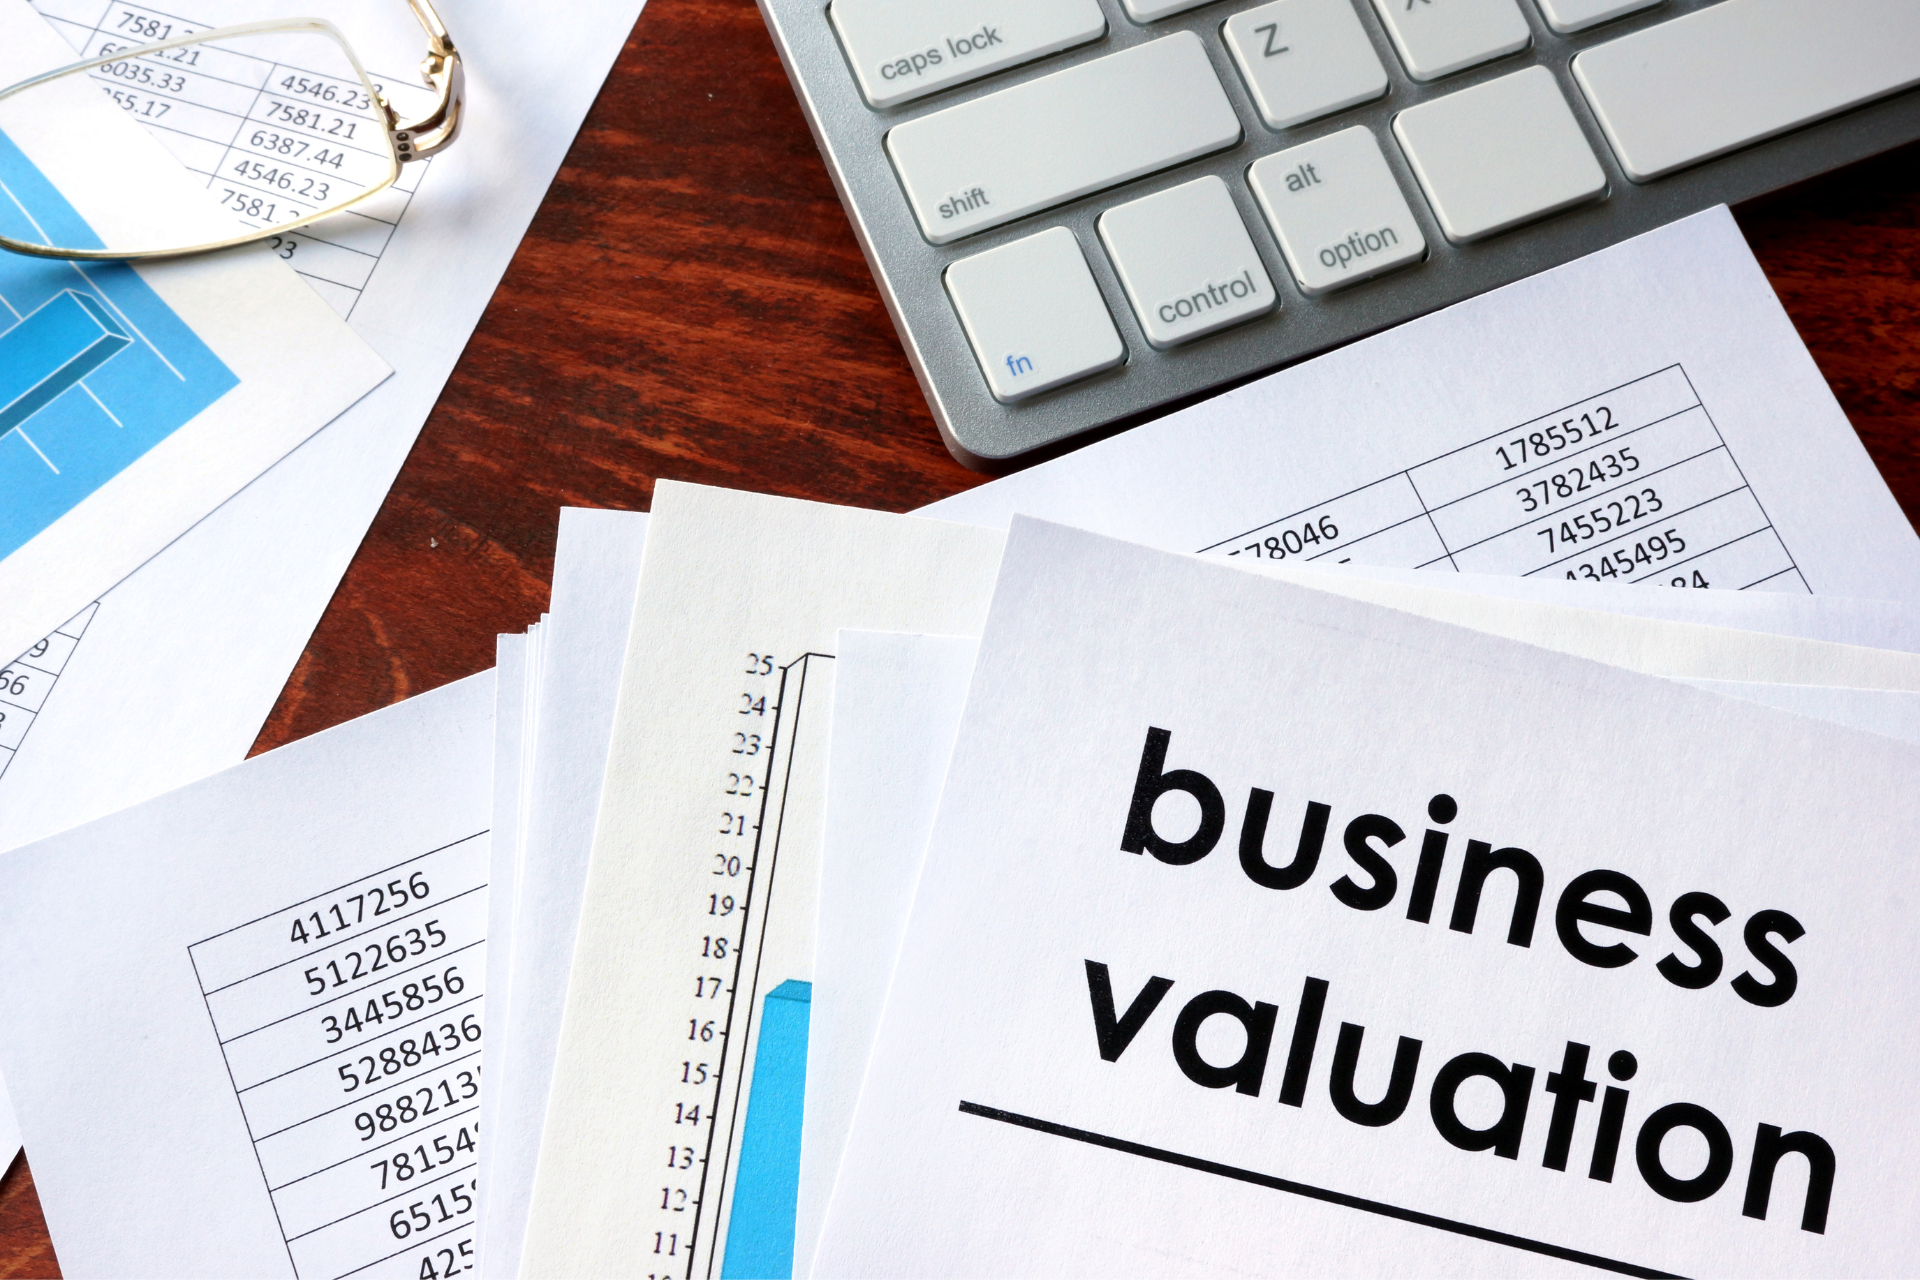 Improved Business Valuation for the Seasonal Branding